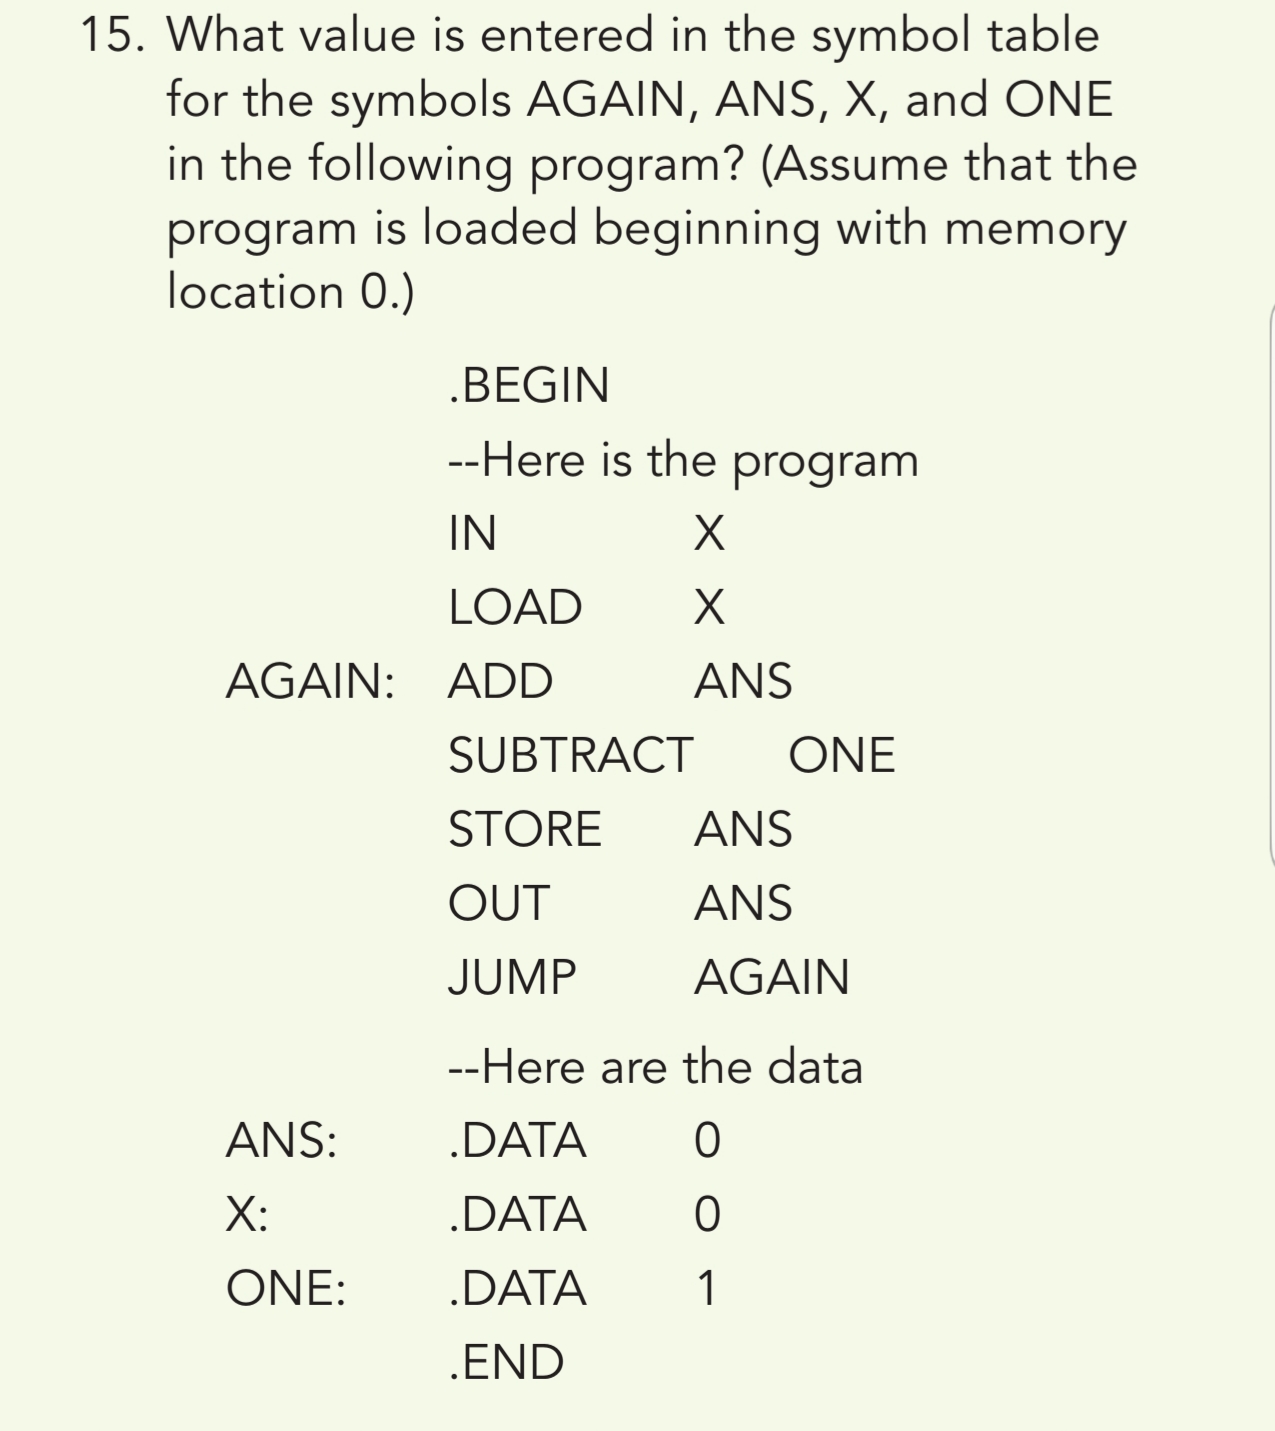 What value is entered in the symbol table
for the symbols AGAIN, ANS, X, and ONE
in the following program? (Assume that the
program is loaded beginning with memory
location 0.)
